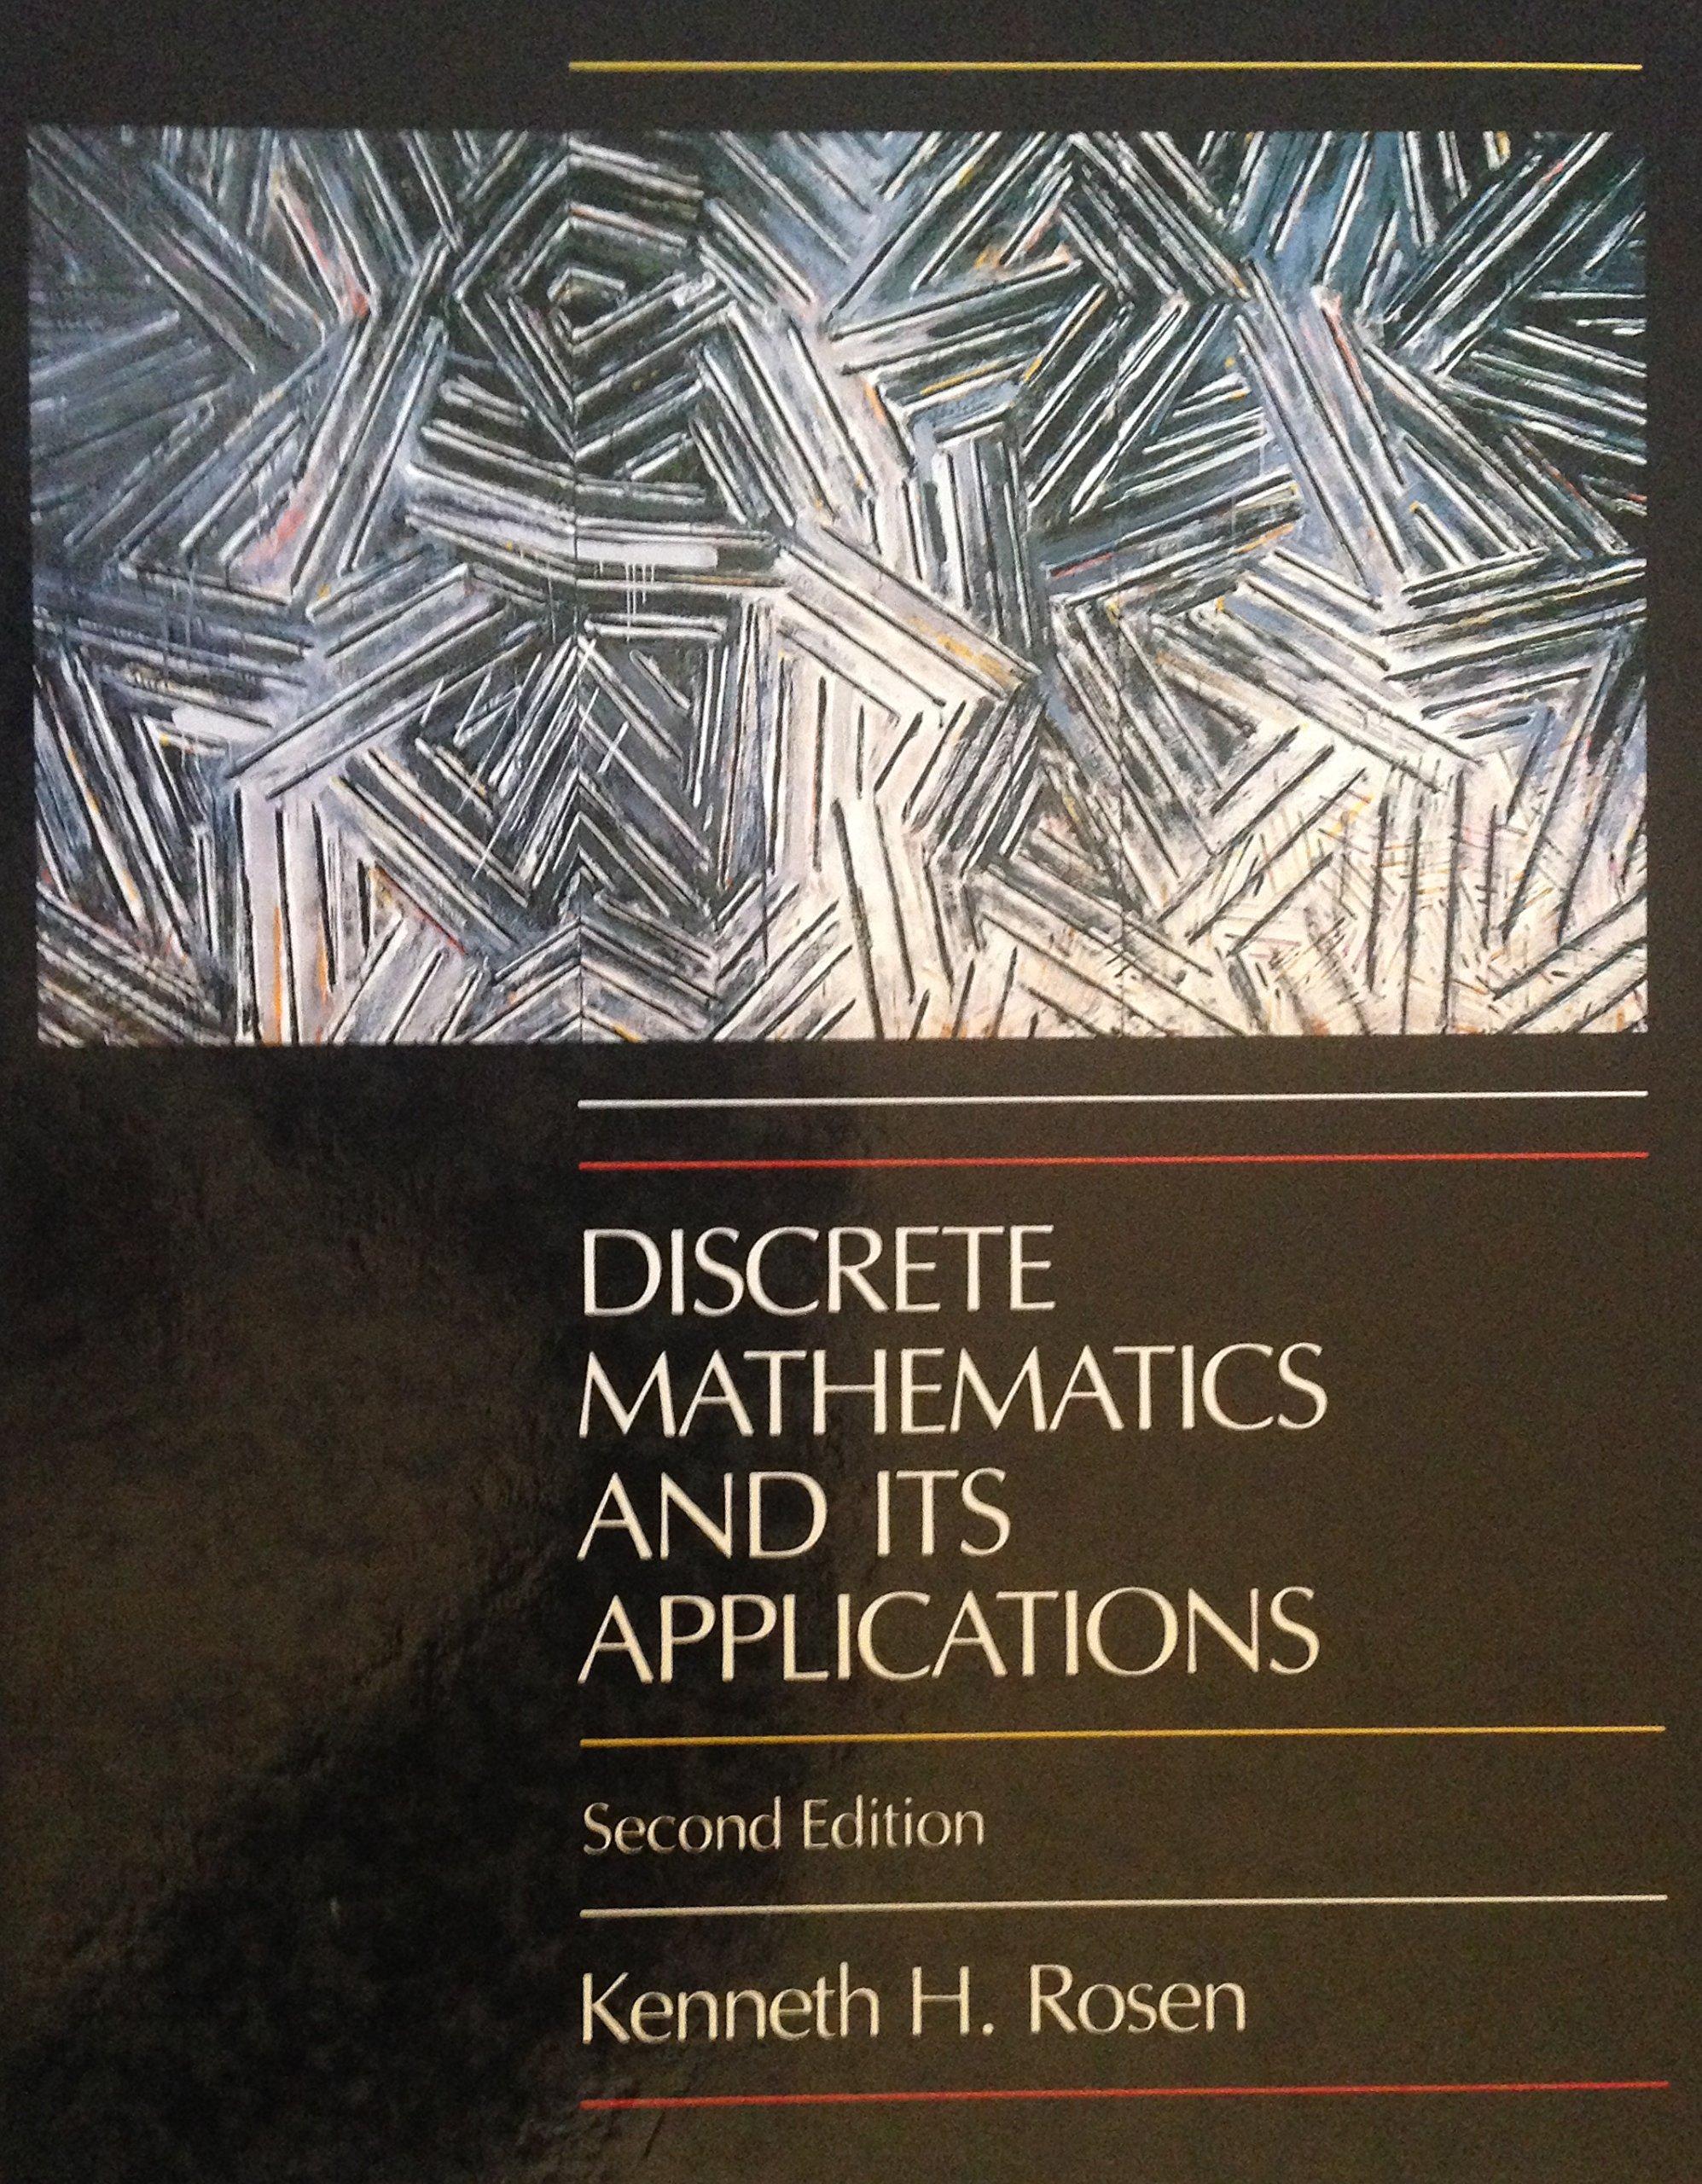 discrete mathematics and its applications 2nd edition kenneth h. rosen 0070537445, 9780070537446